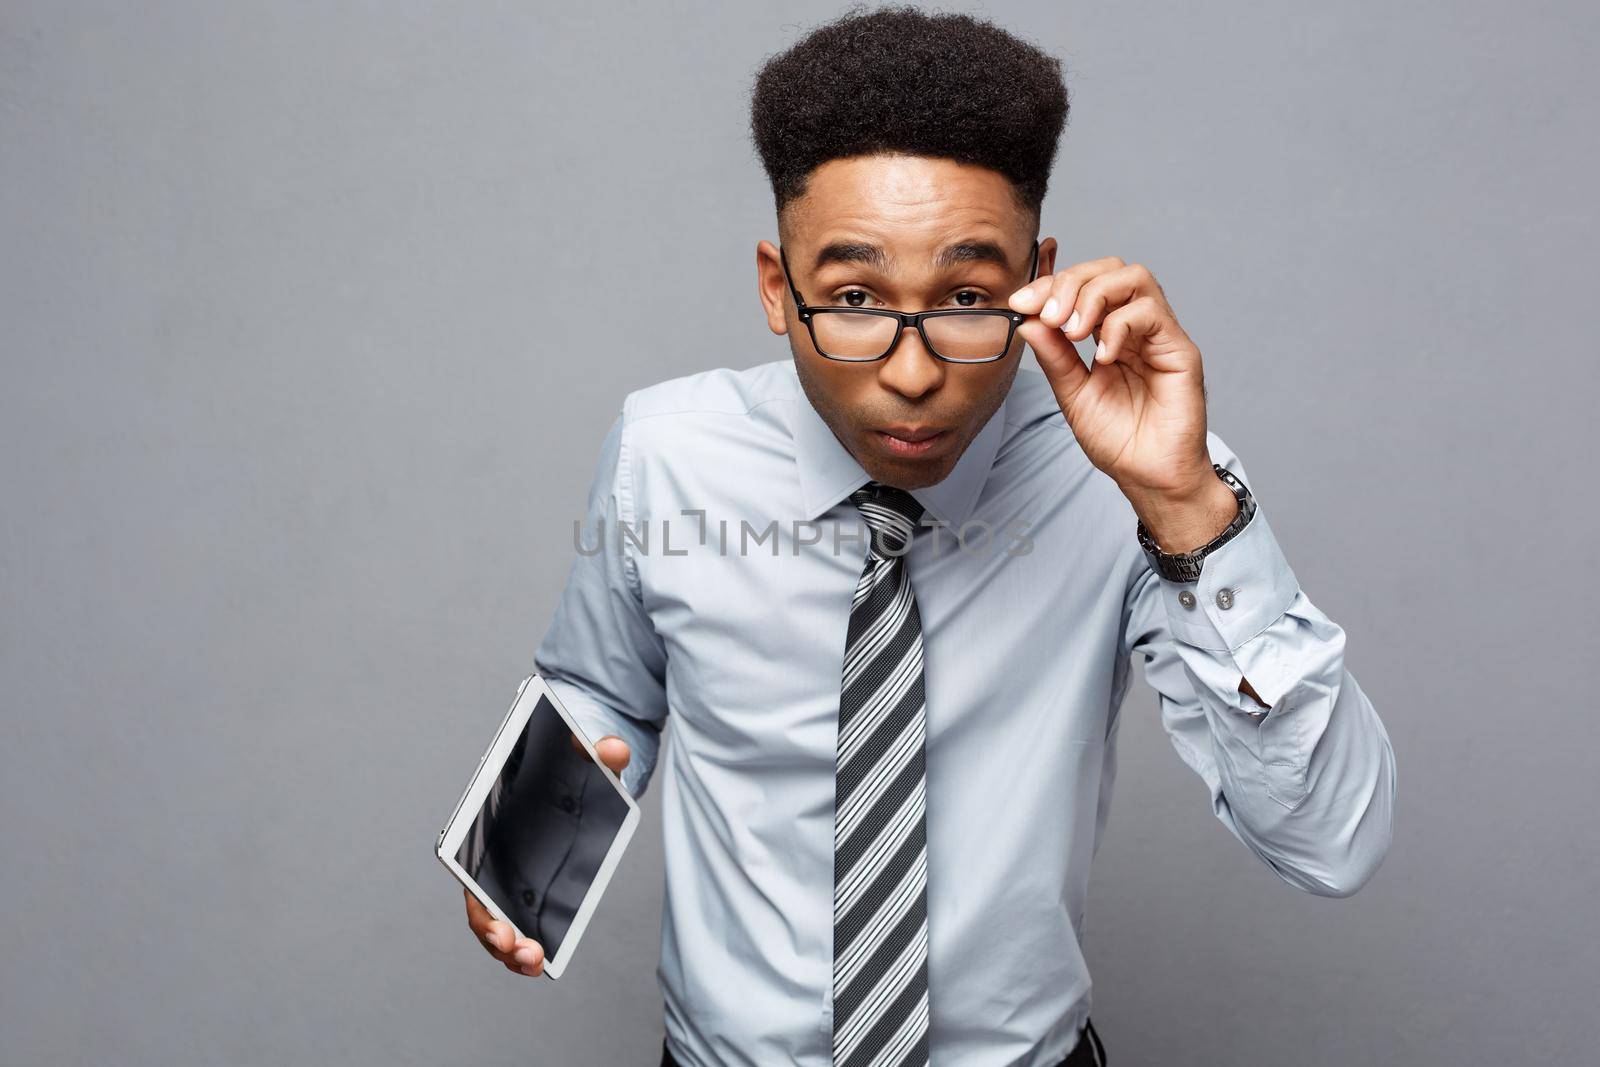 Business Concept - Happy handsome professional african american businessman holding tablet with surprising facial expression